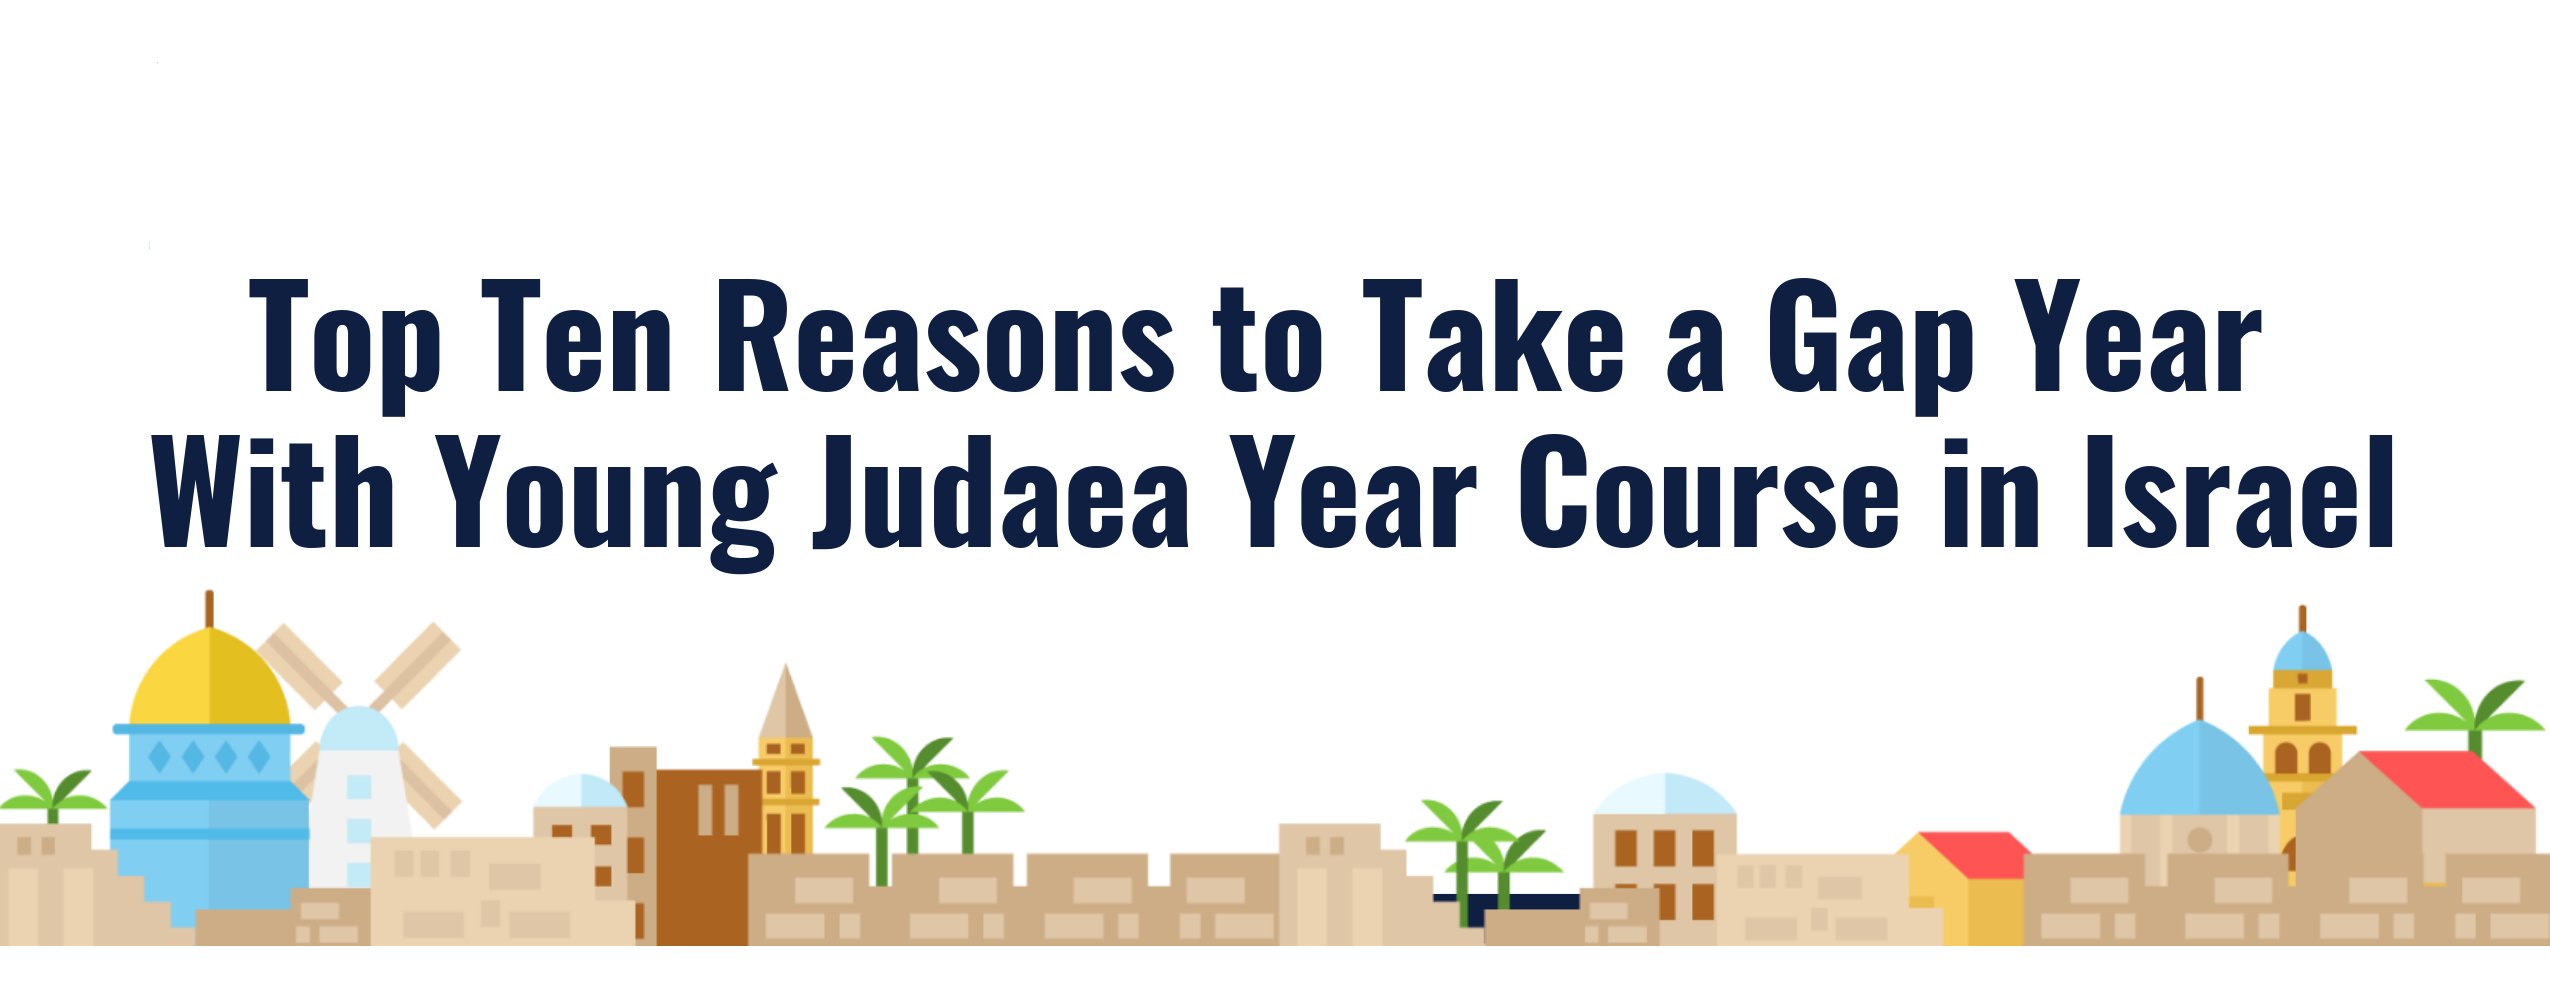 Ten Reasons to Go on Year Course